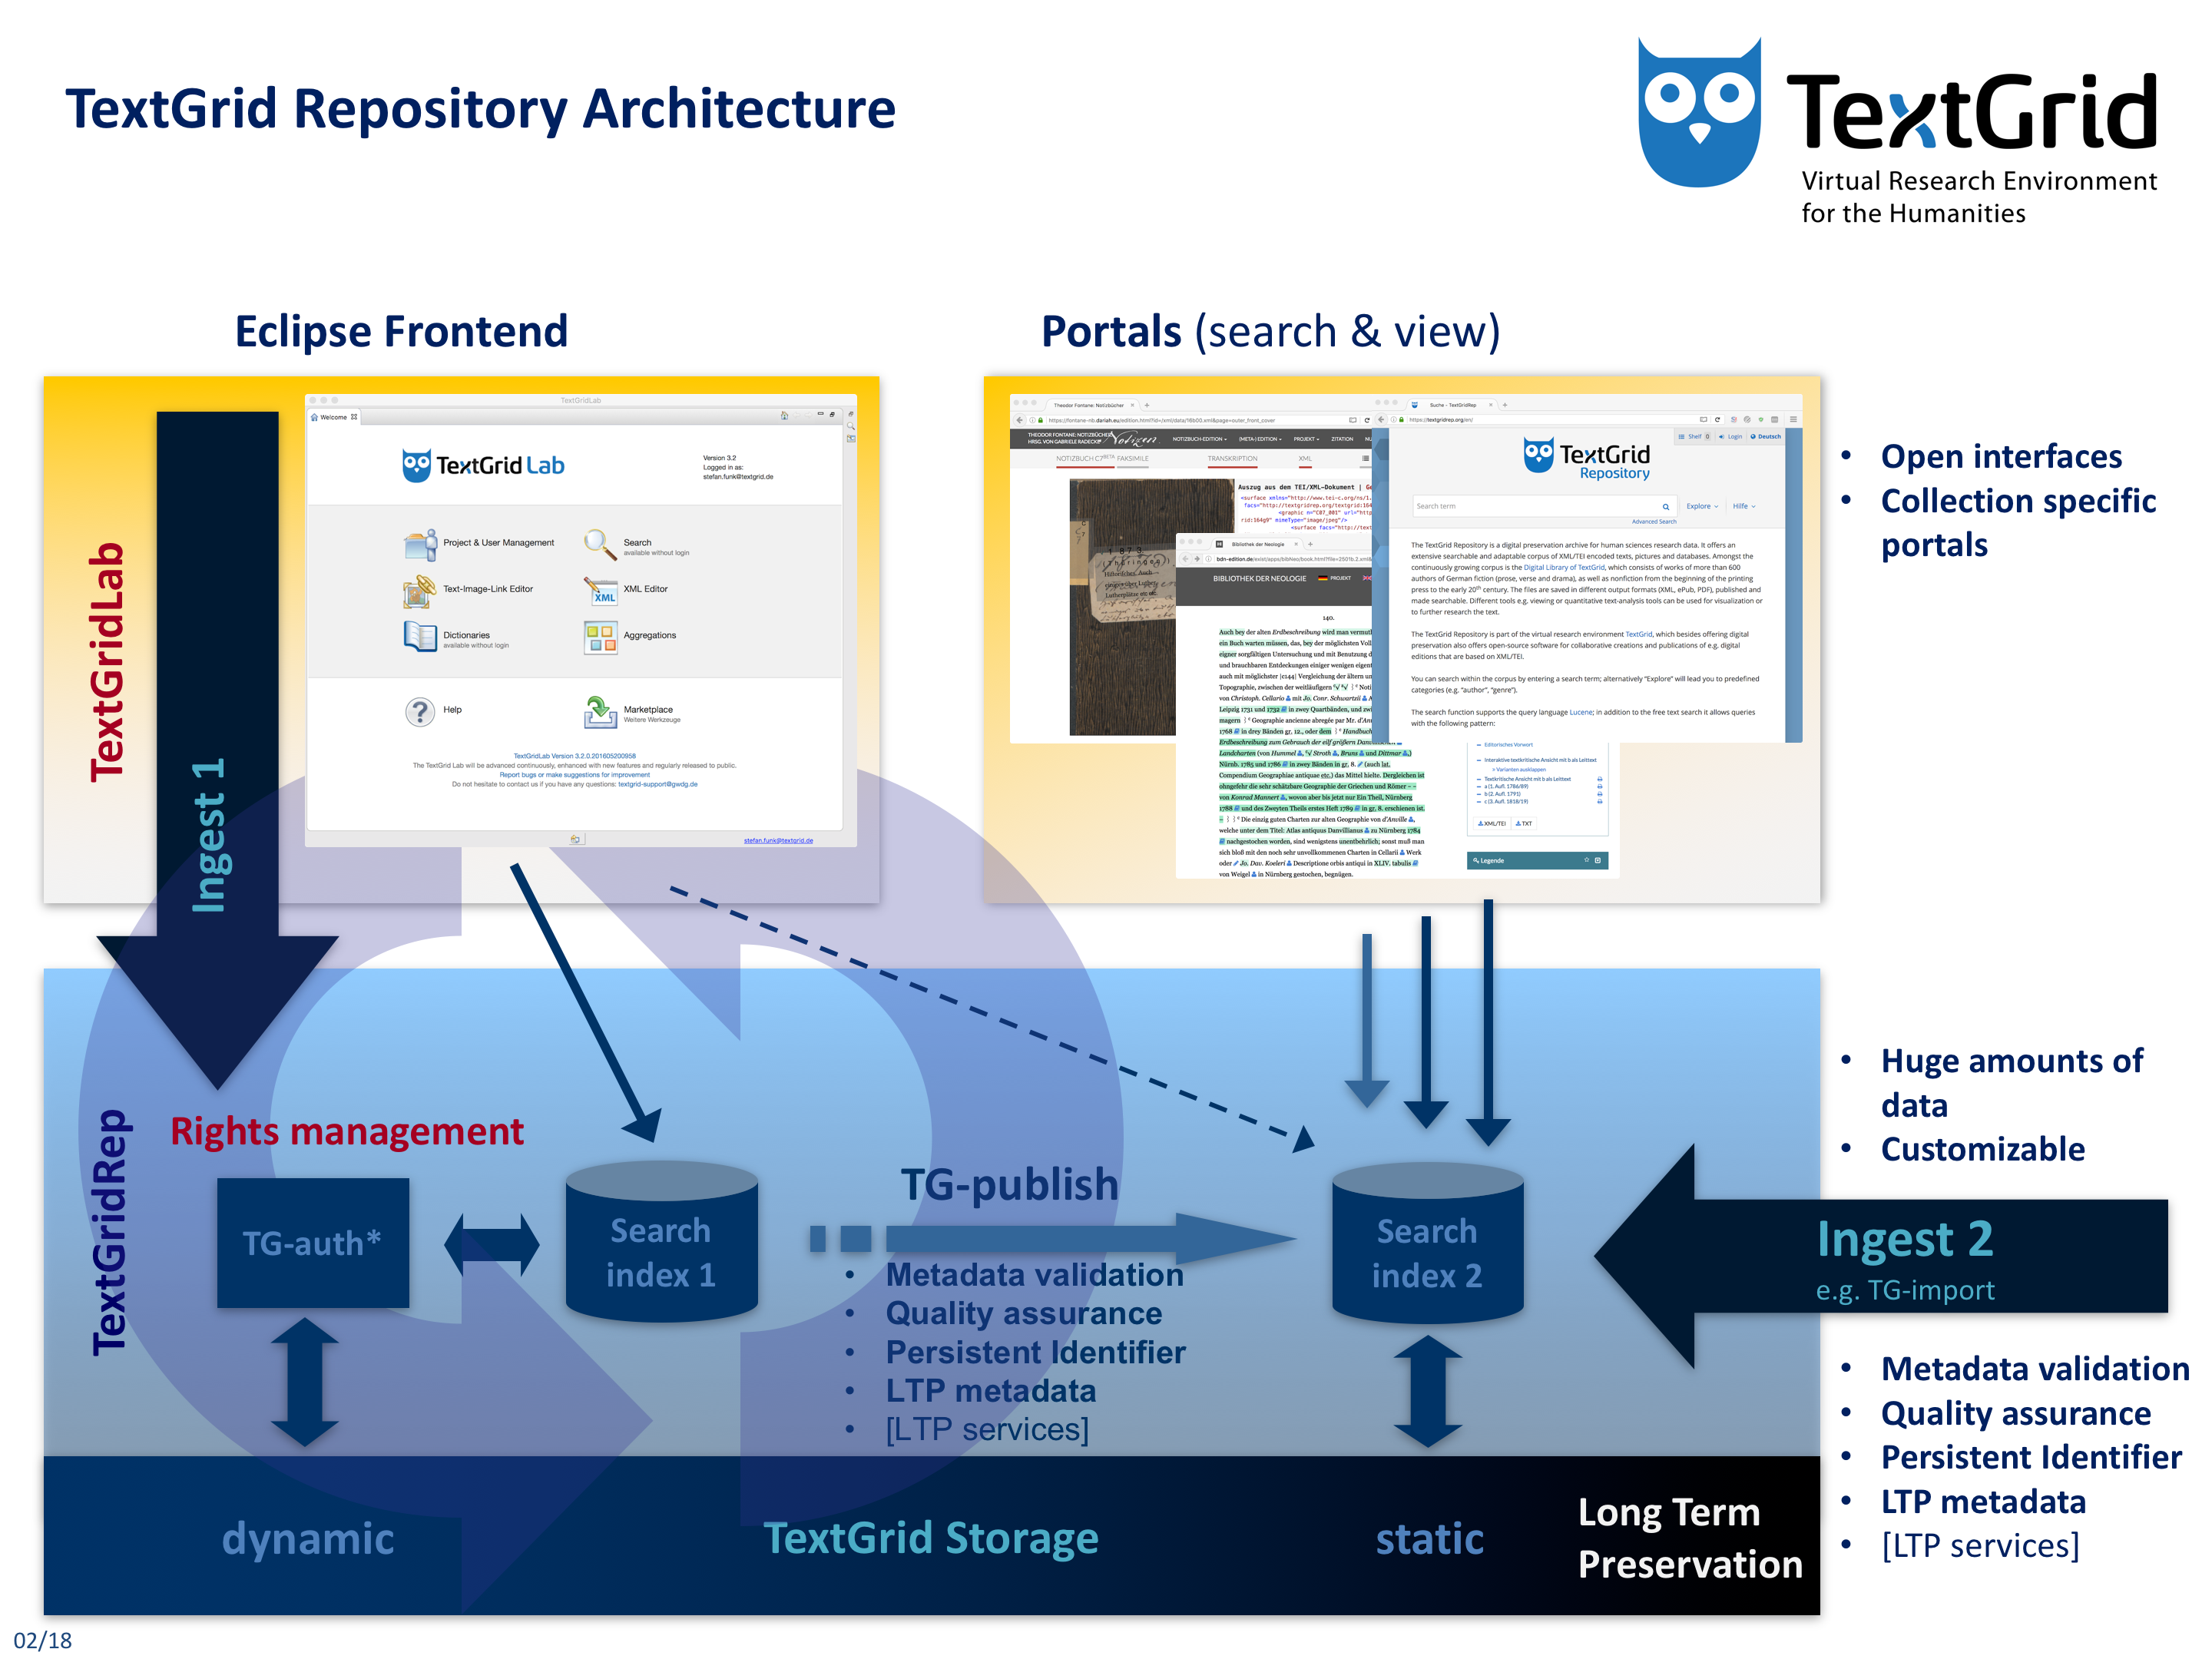 Fig. 1: The TextGrid Repository Architecture